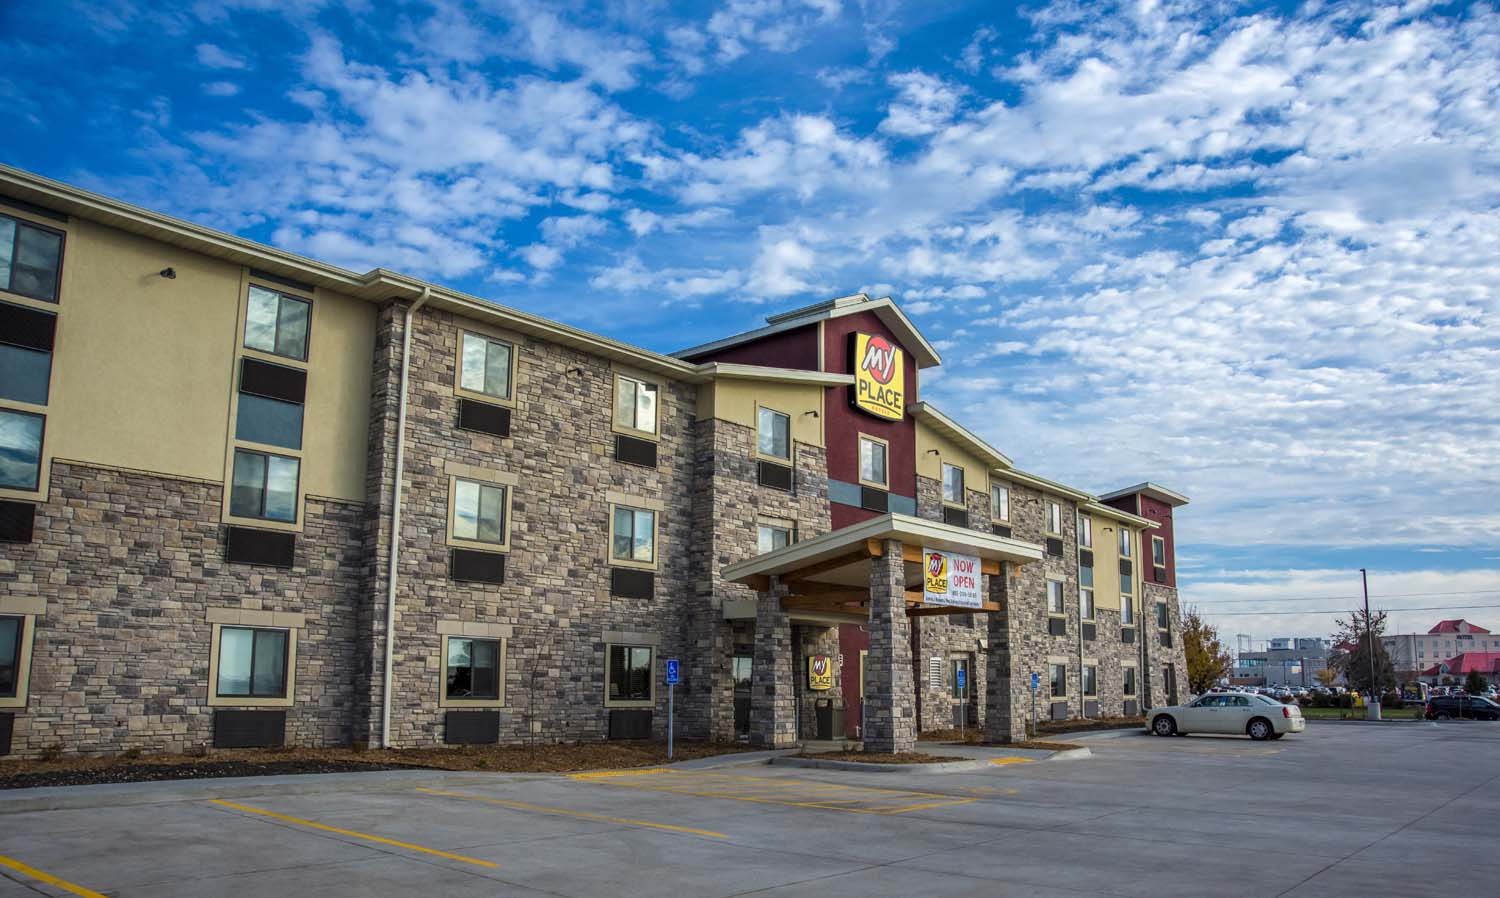 Pet Friendly My Place Hotel - Carson City, NV in Carson City, Nevada